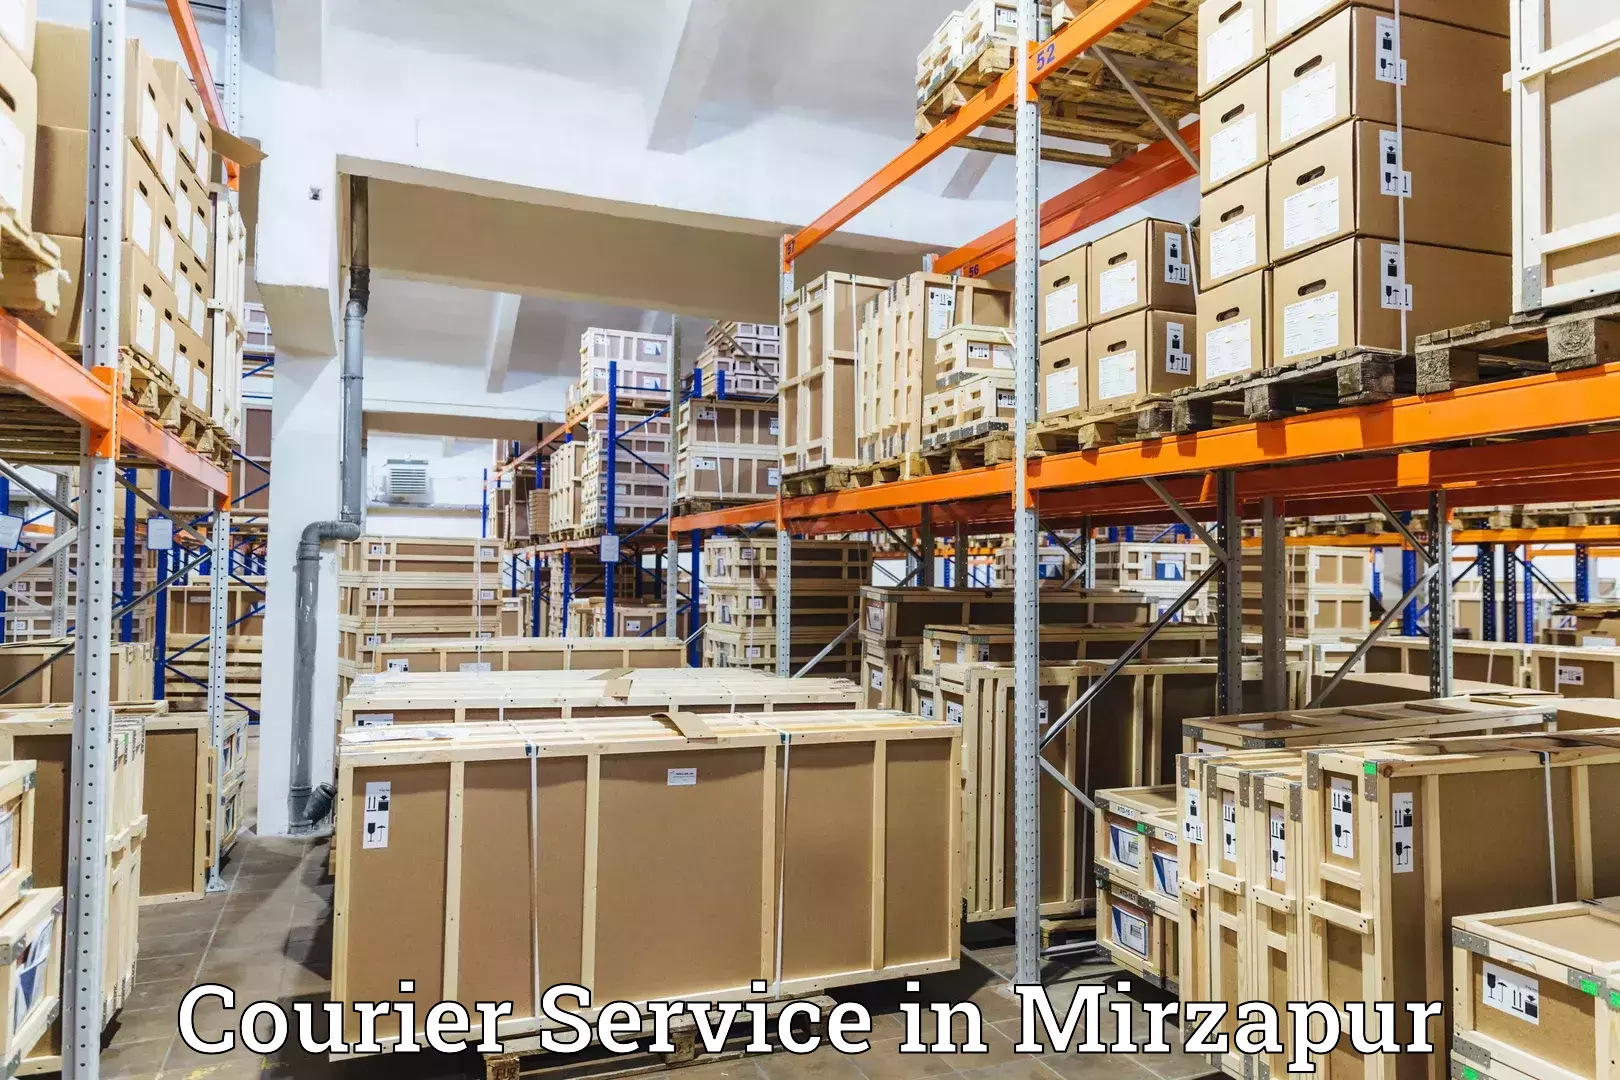 Parcel service for businesses in Mirzapur